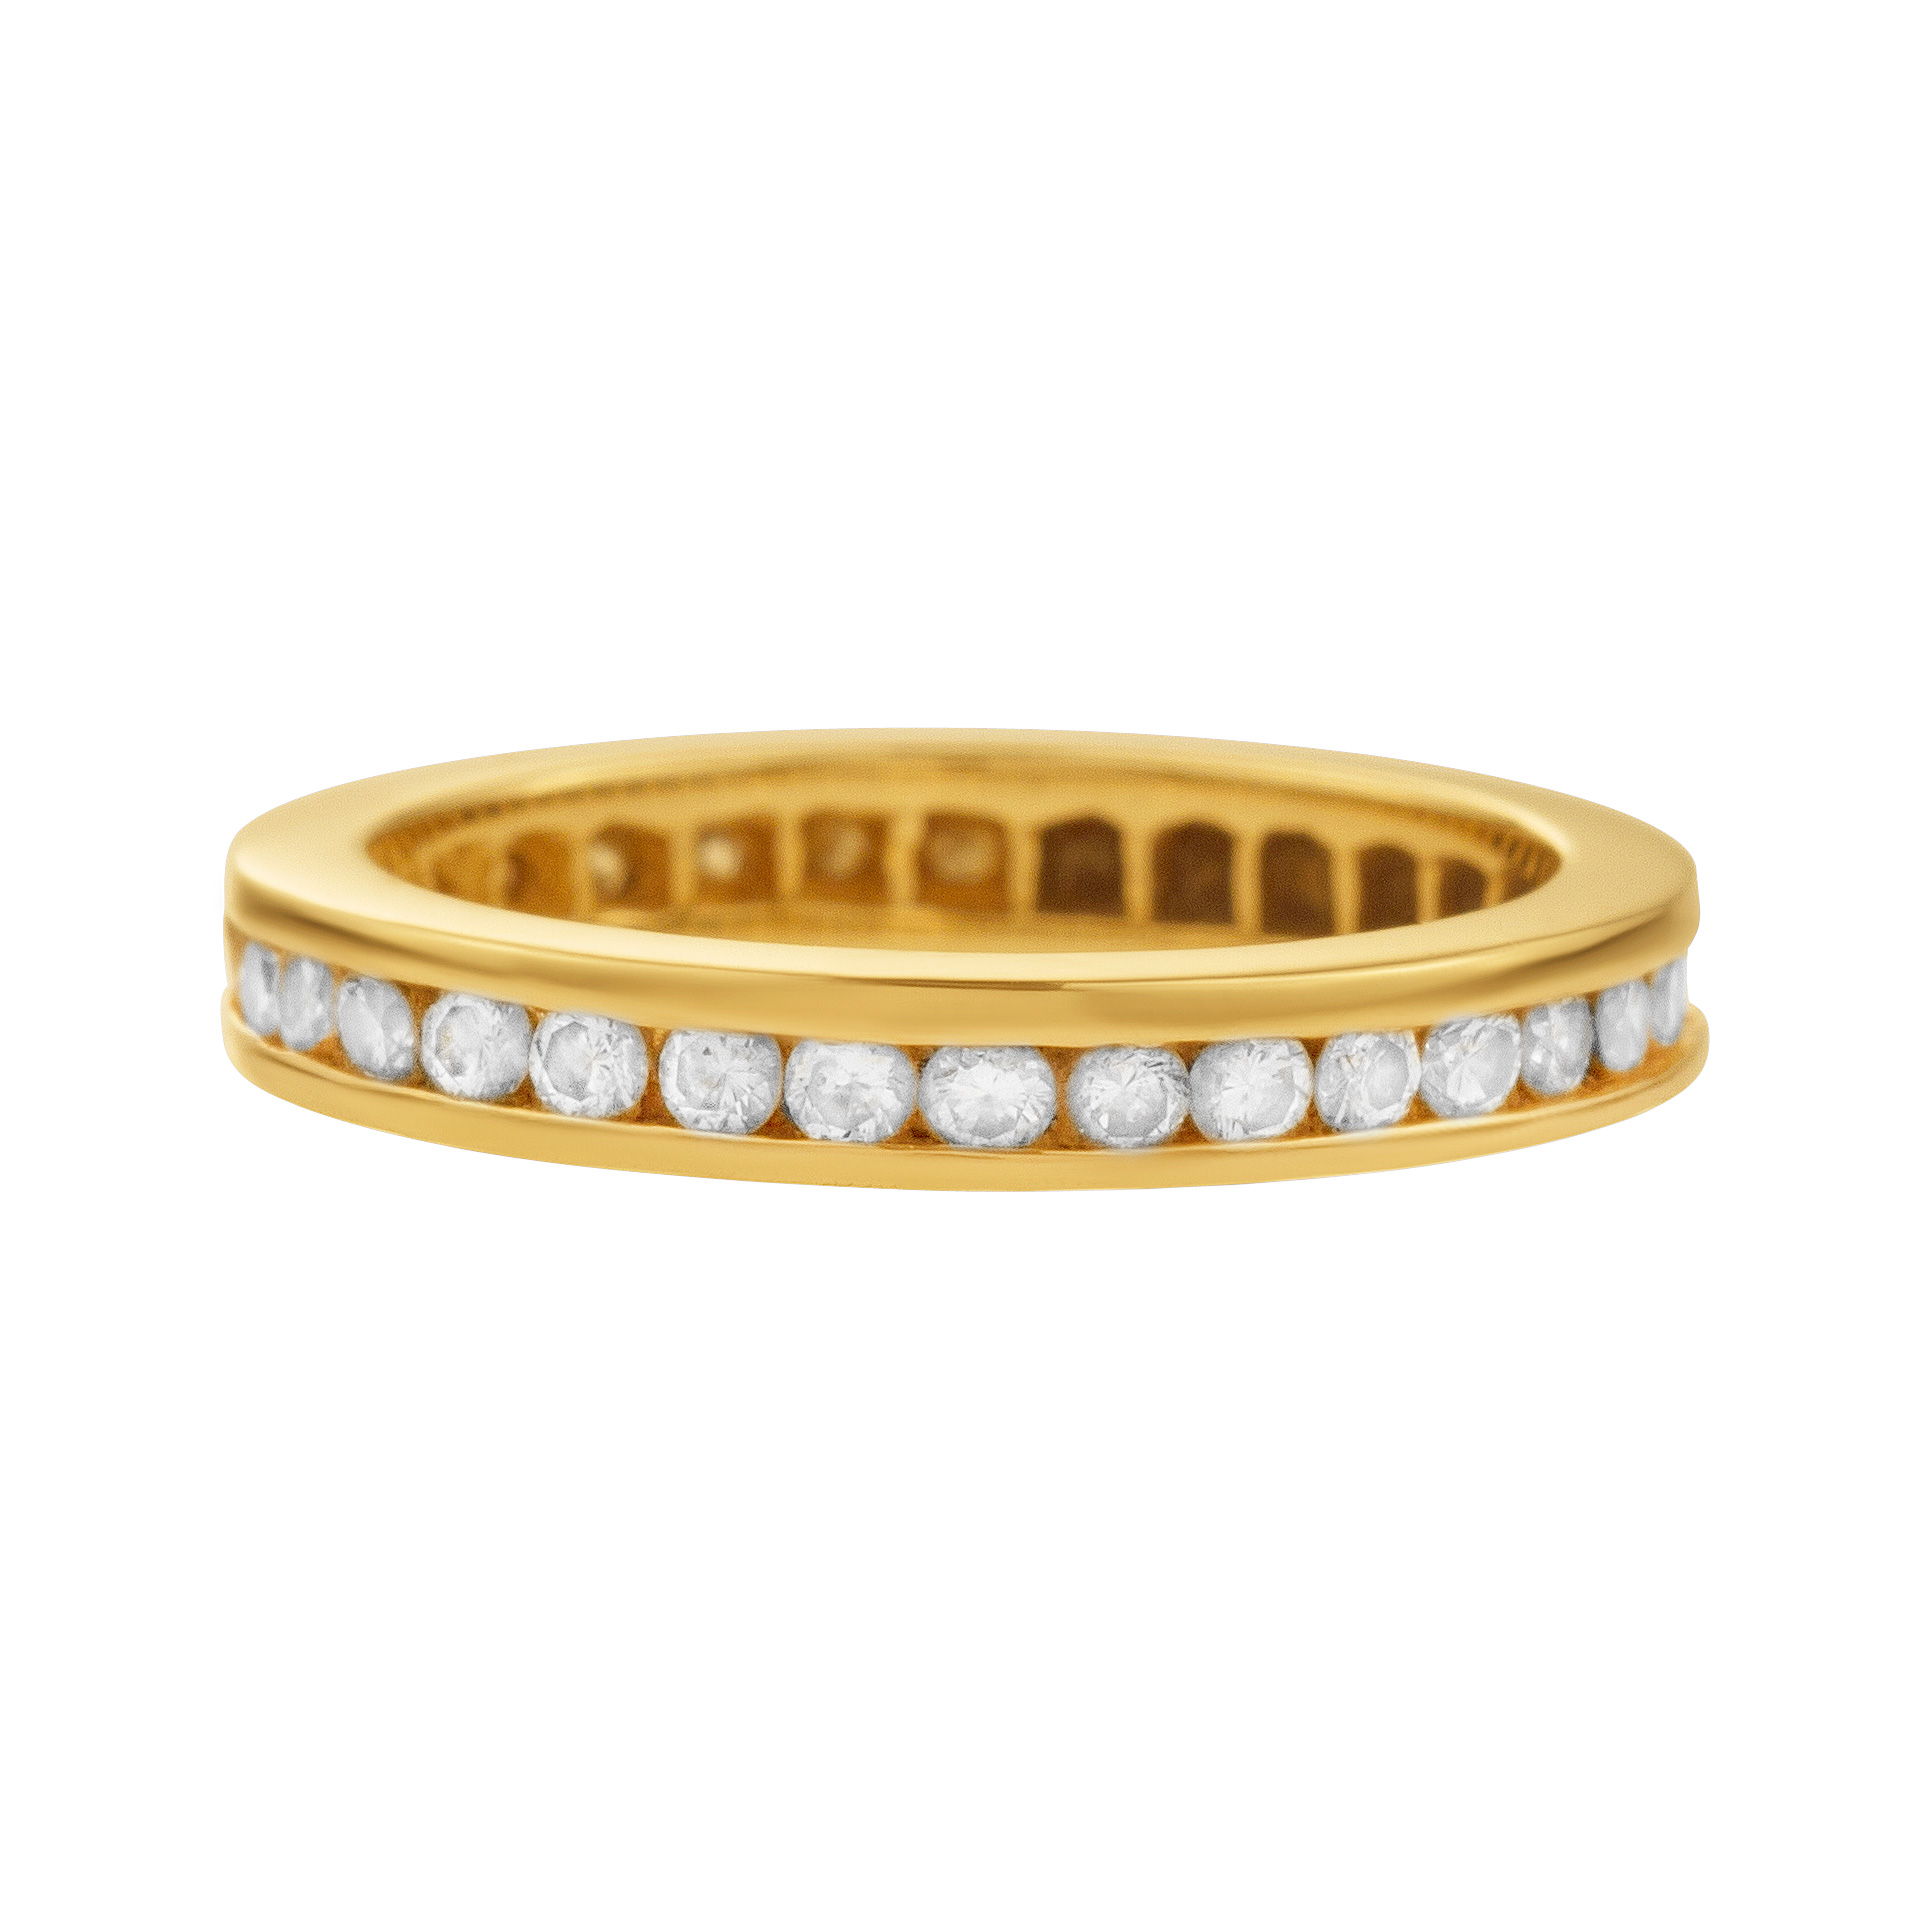 Diamond Band In 14k Yellow Gold. 0.50 carats in clean white diamonds. Size 4.25 image 1